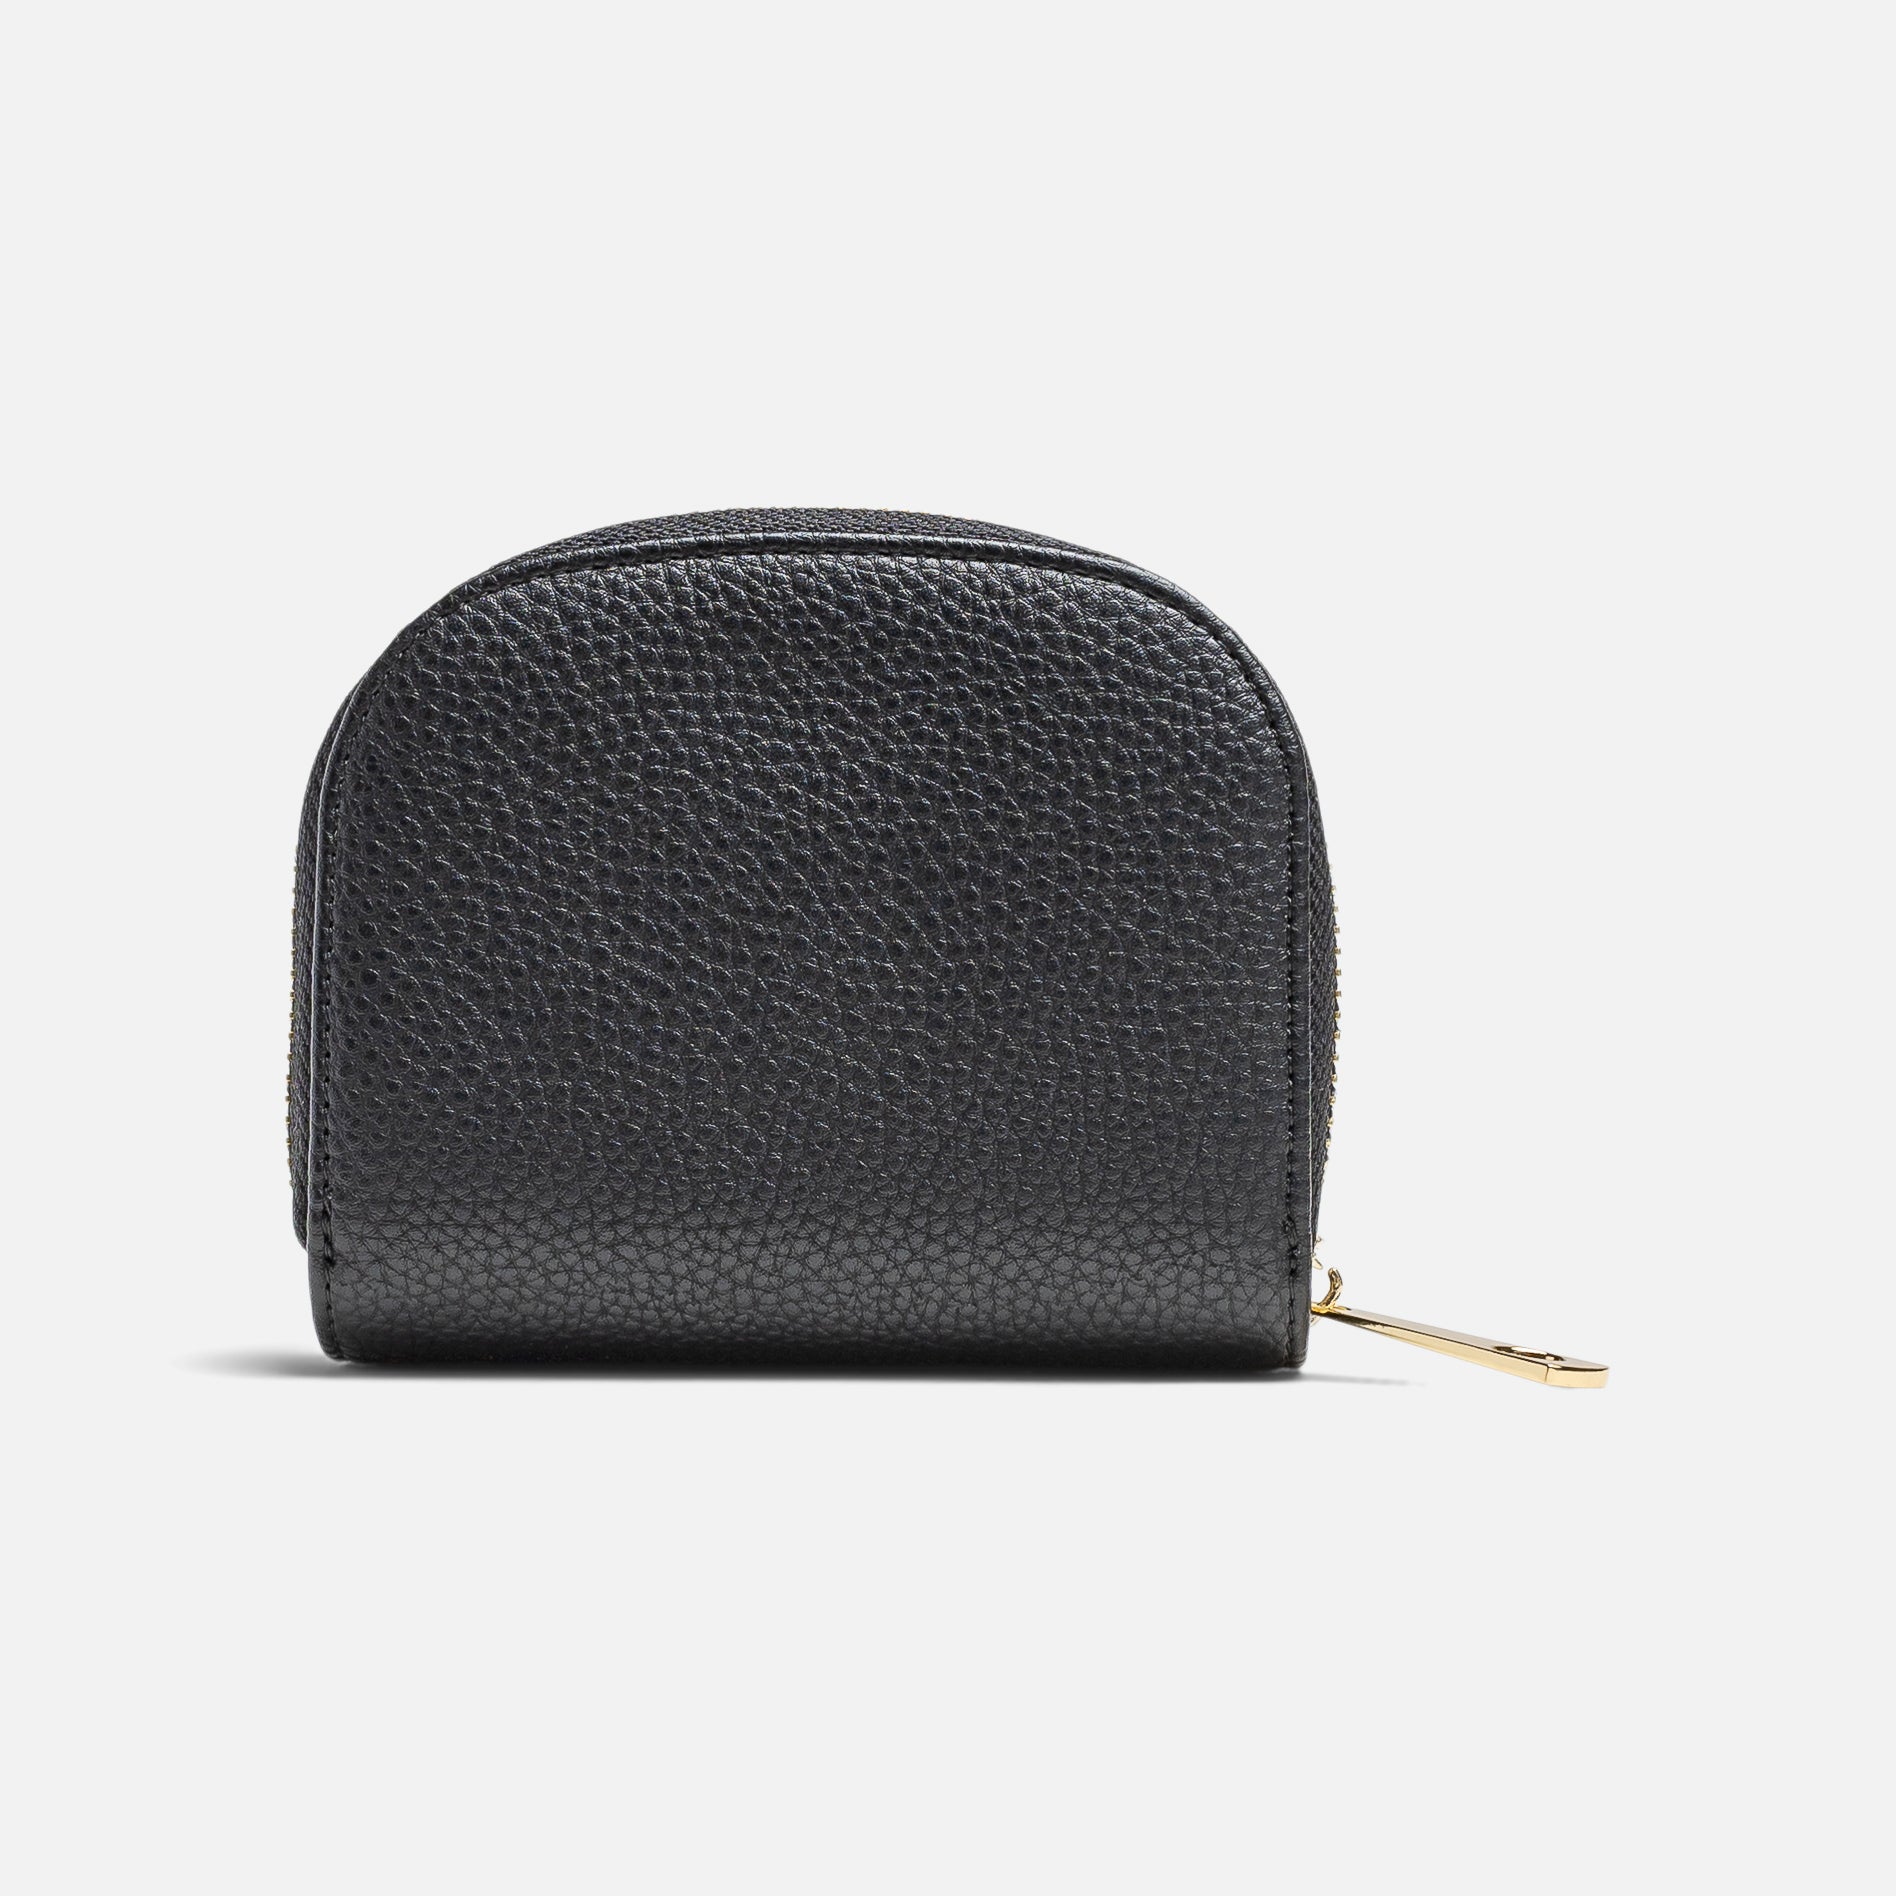 Black round shaped card holder in leatherette with gold details